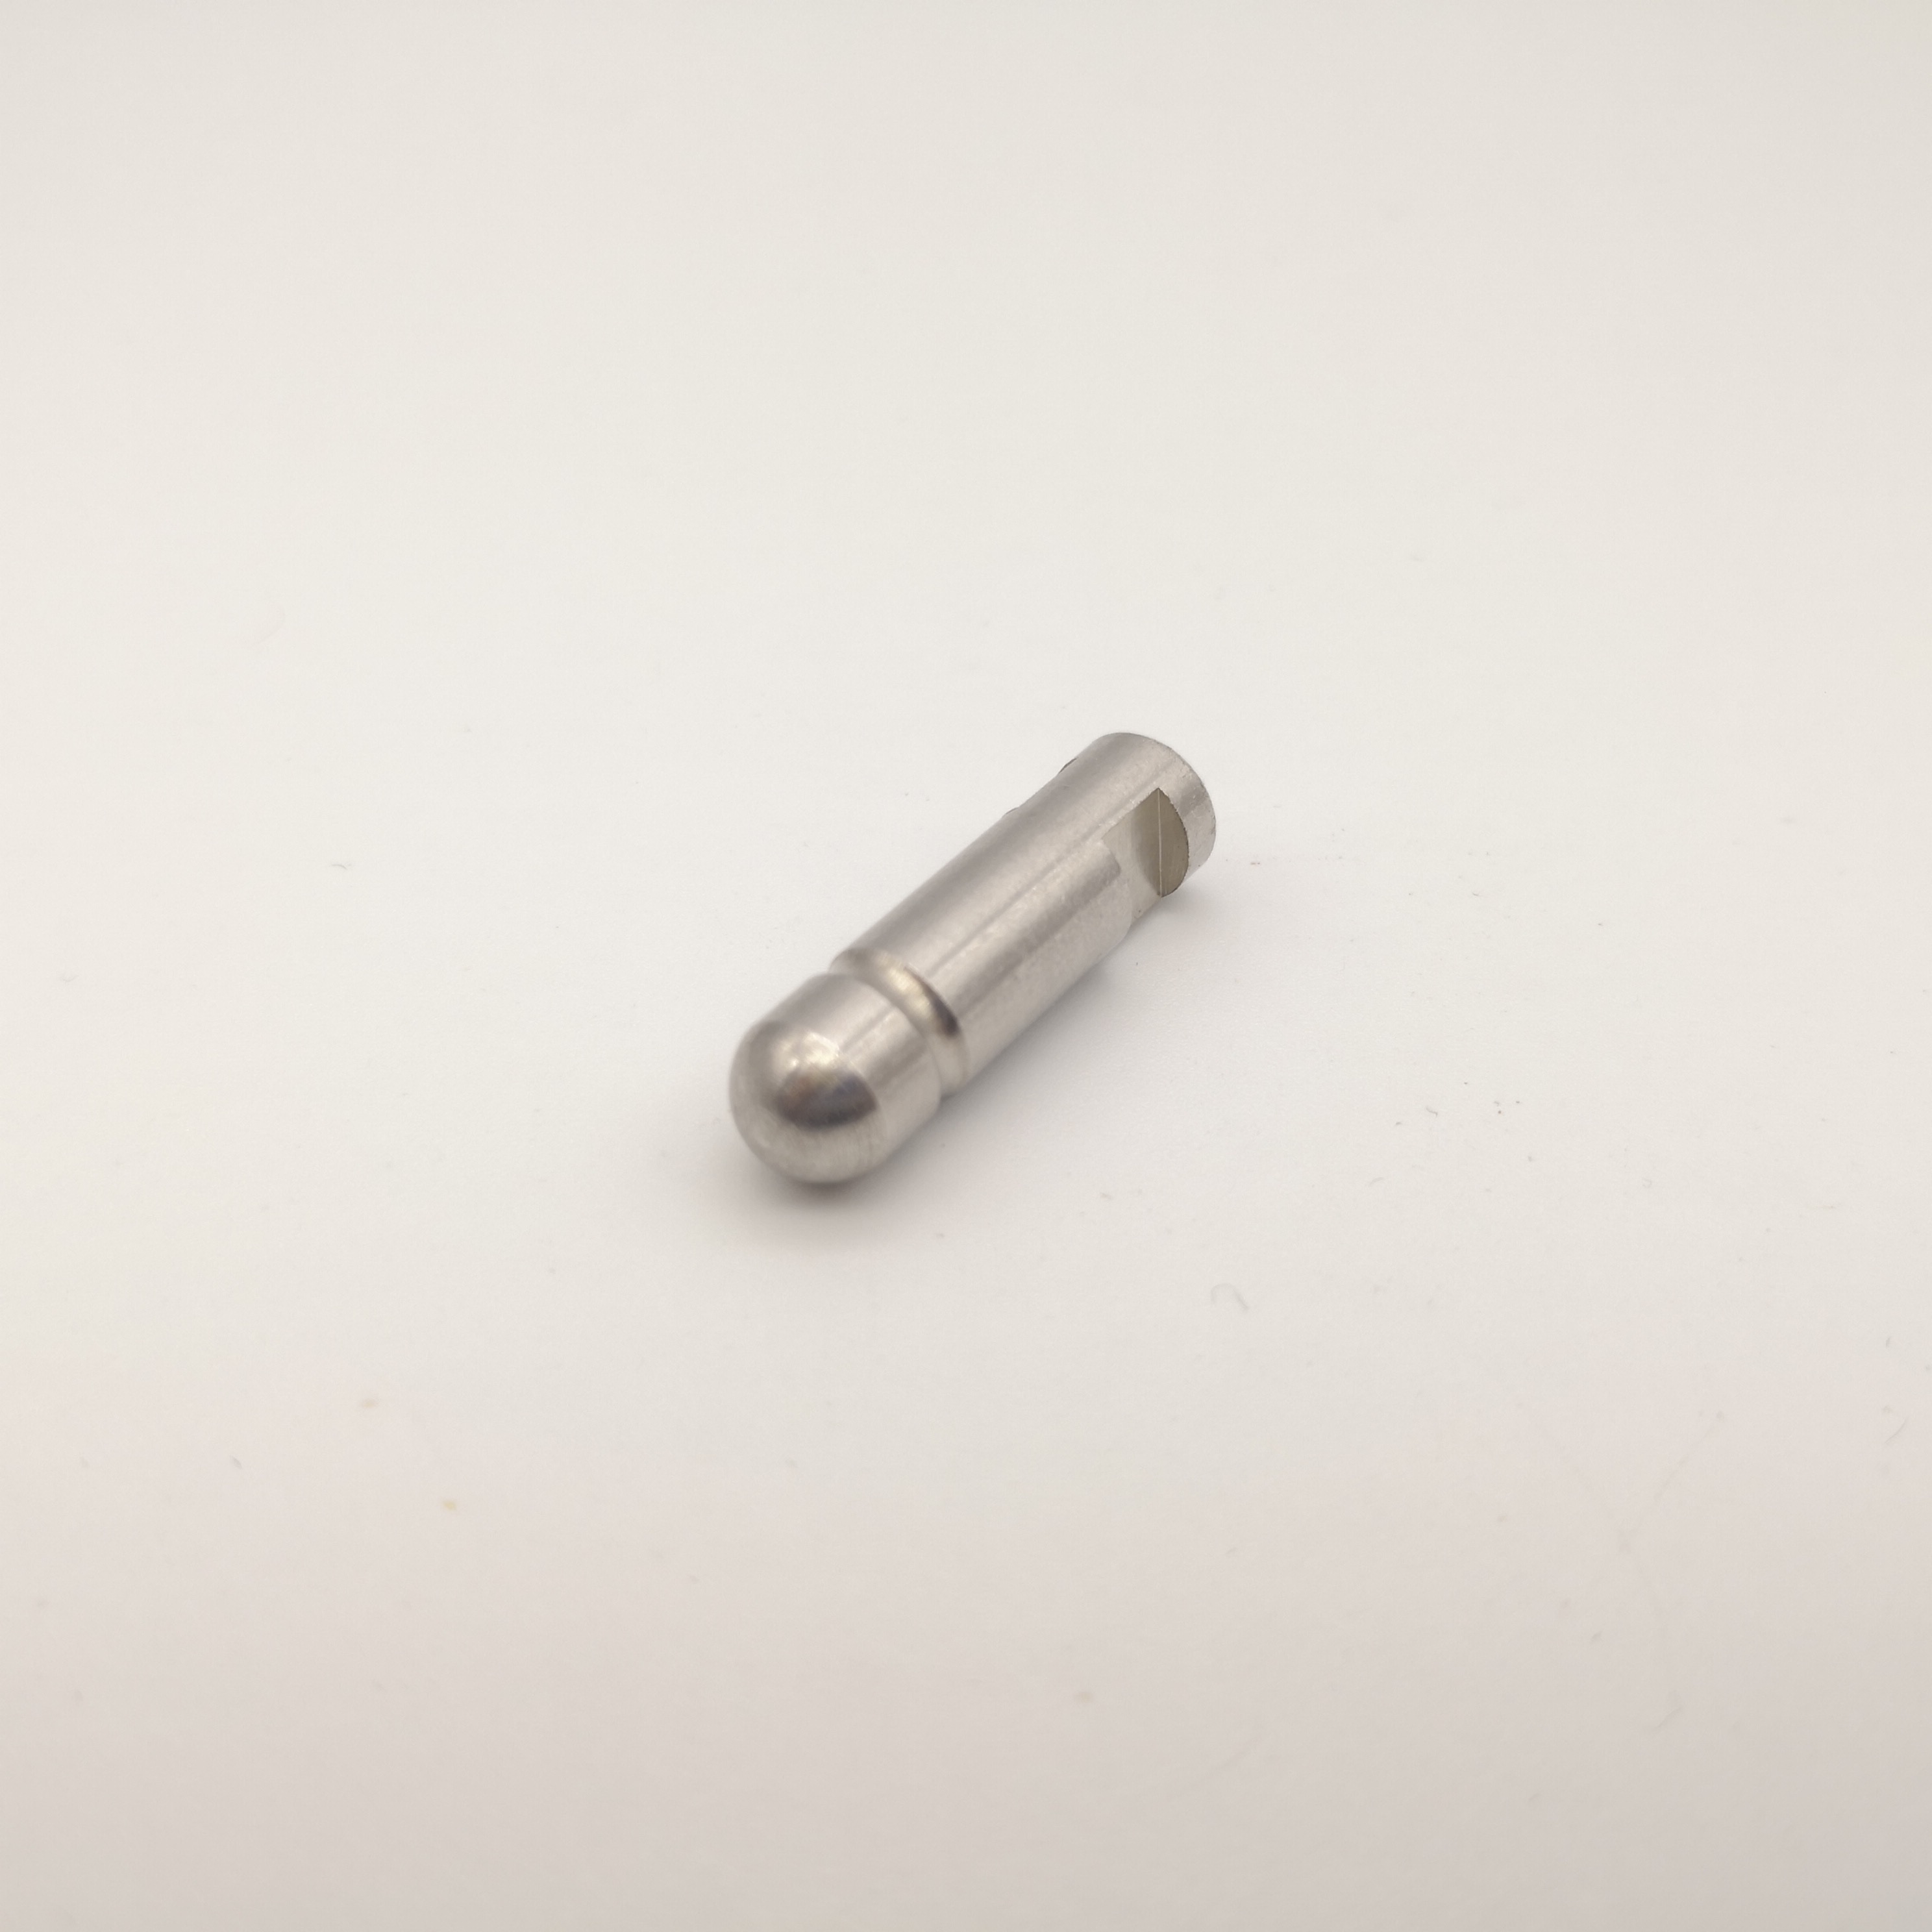 ODM Cnc China Manufacturers –  All series of machining products – RAISING-Elec detail pictures